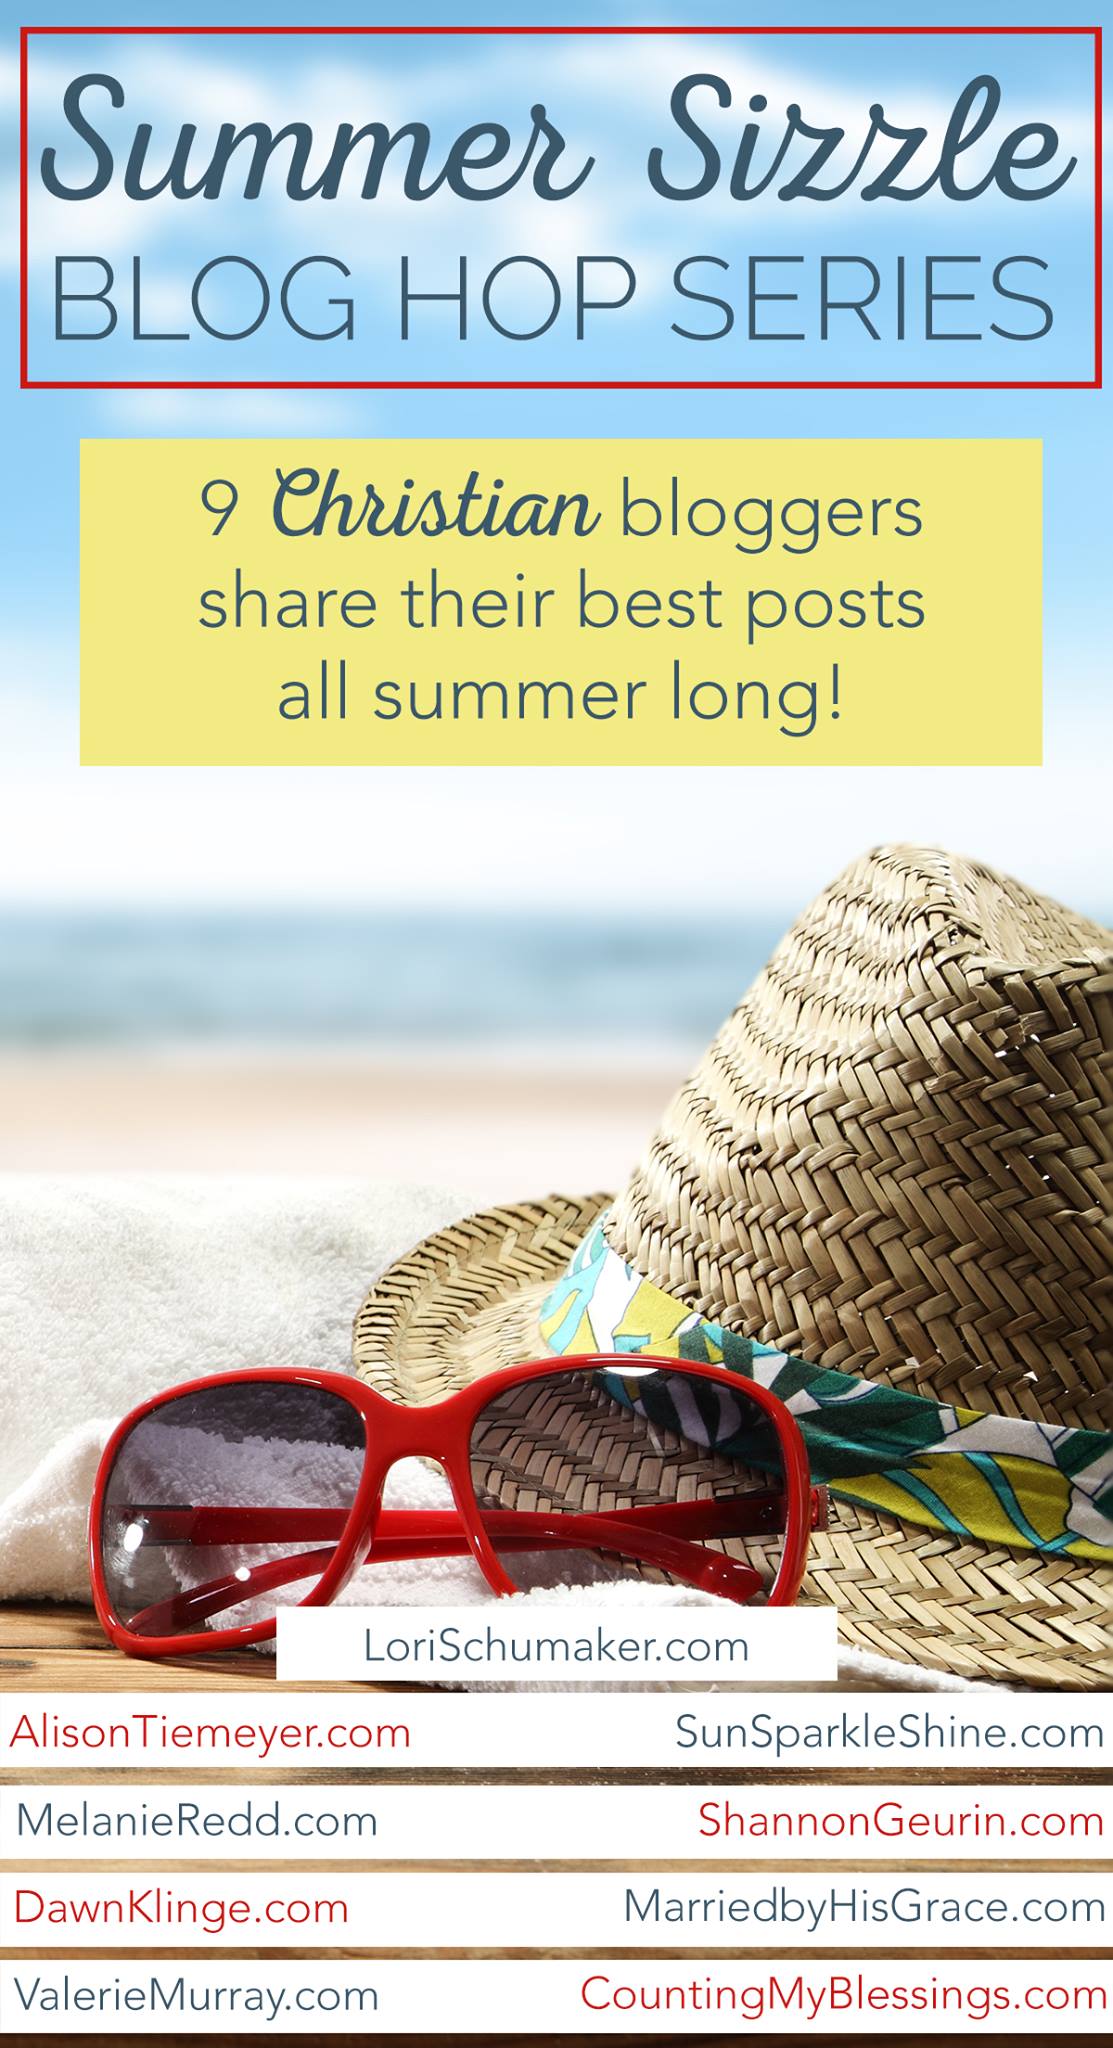 Summer Sizzle - all the best posts from 9 Christian bloggers | SunSparkleShine.com